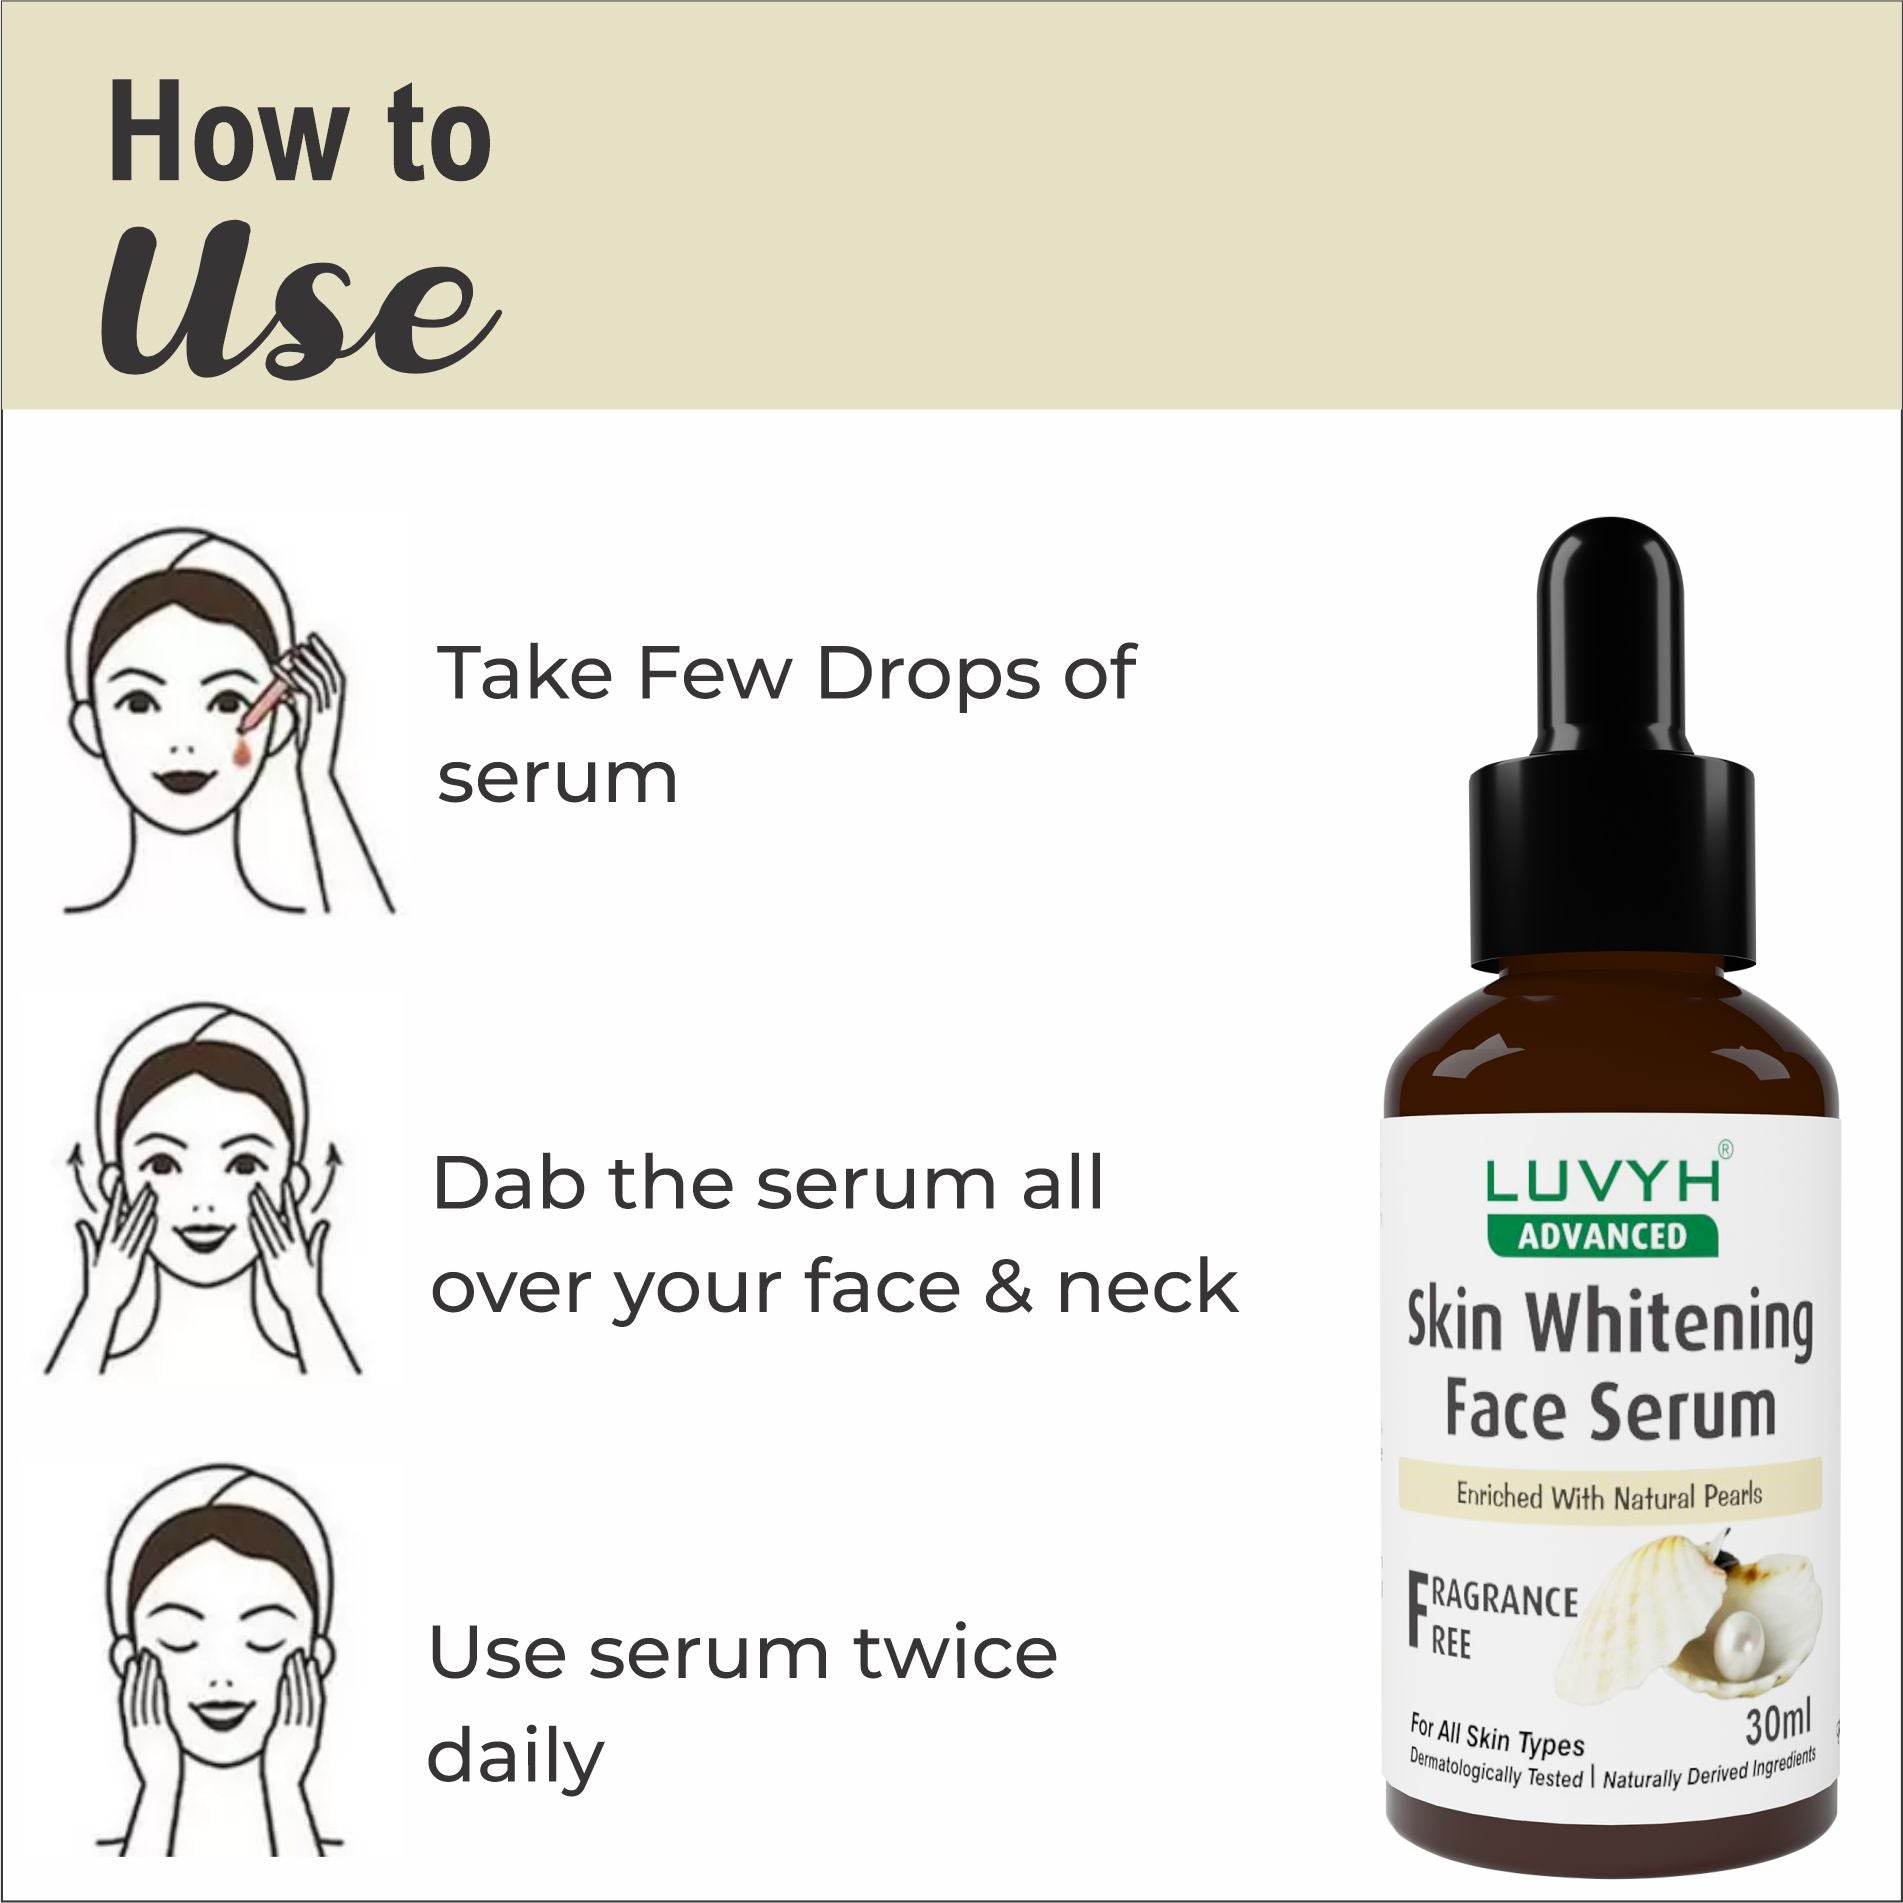 How to use Skin Whitening Face Serum enriched with Natural Pearls 